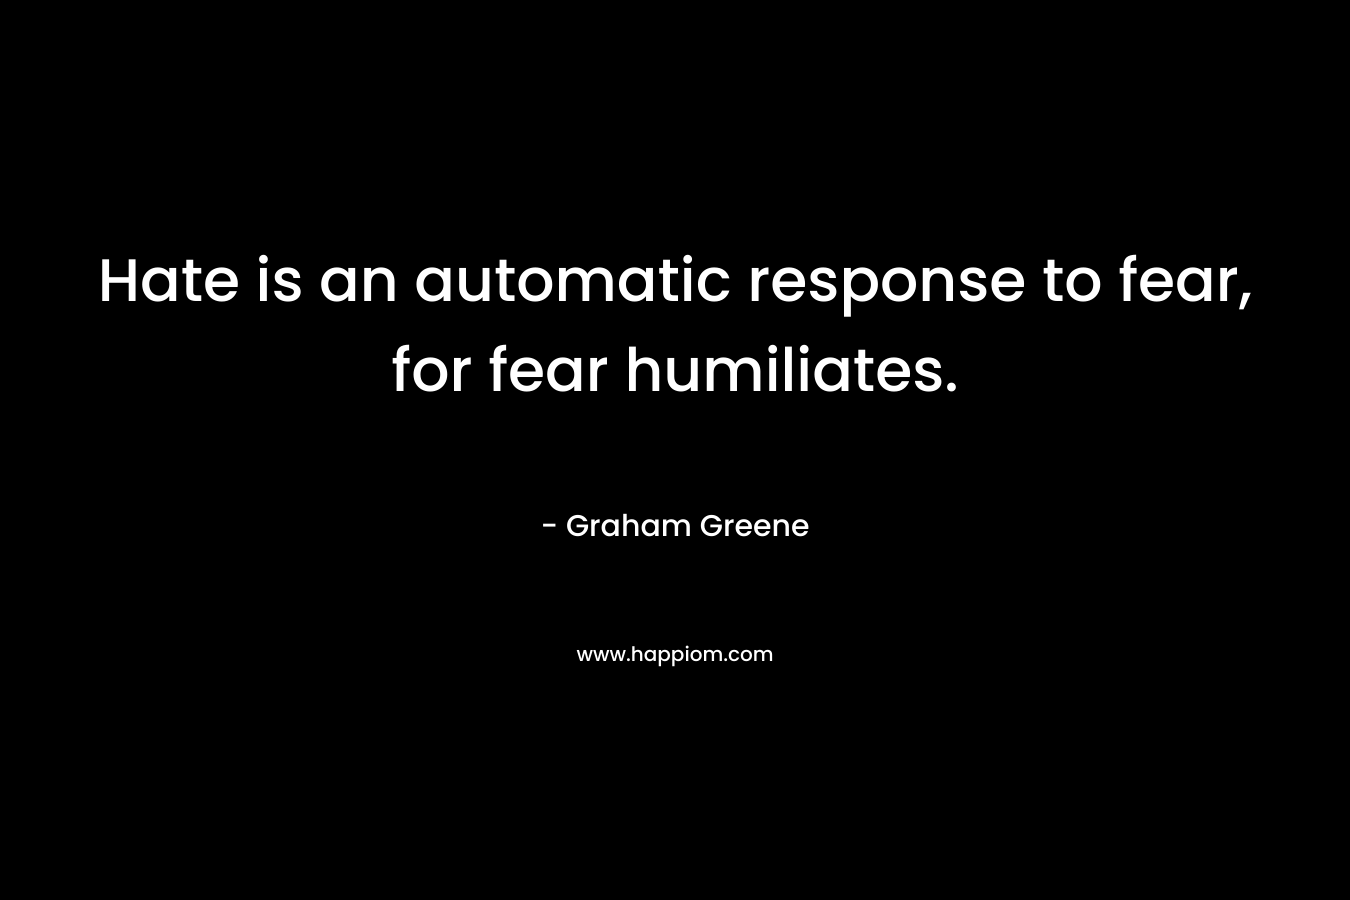 Hate is an automatic response to fear, for fear humiliates.